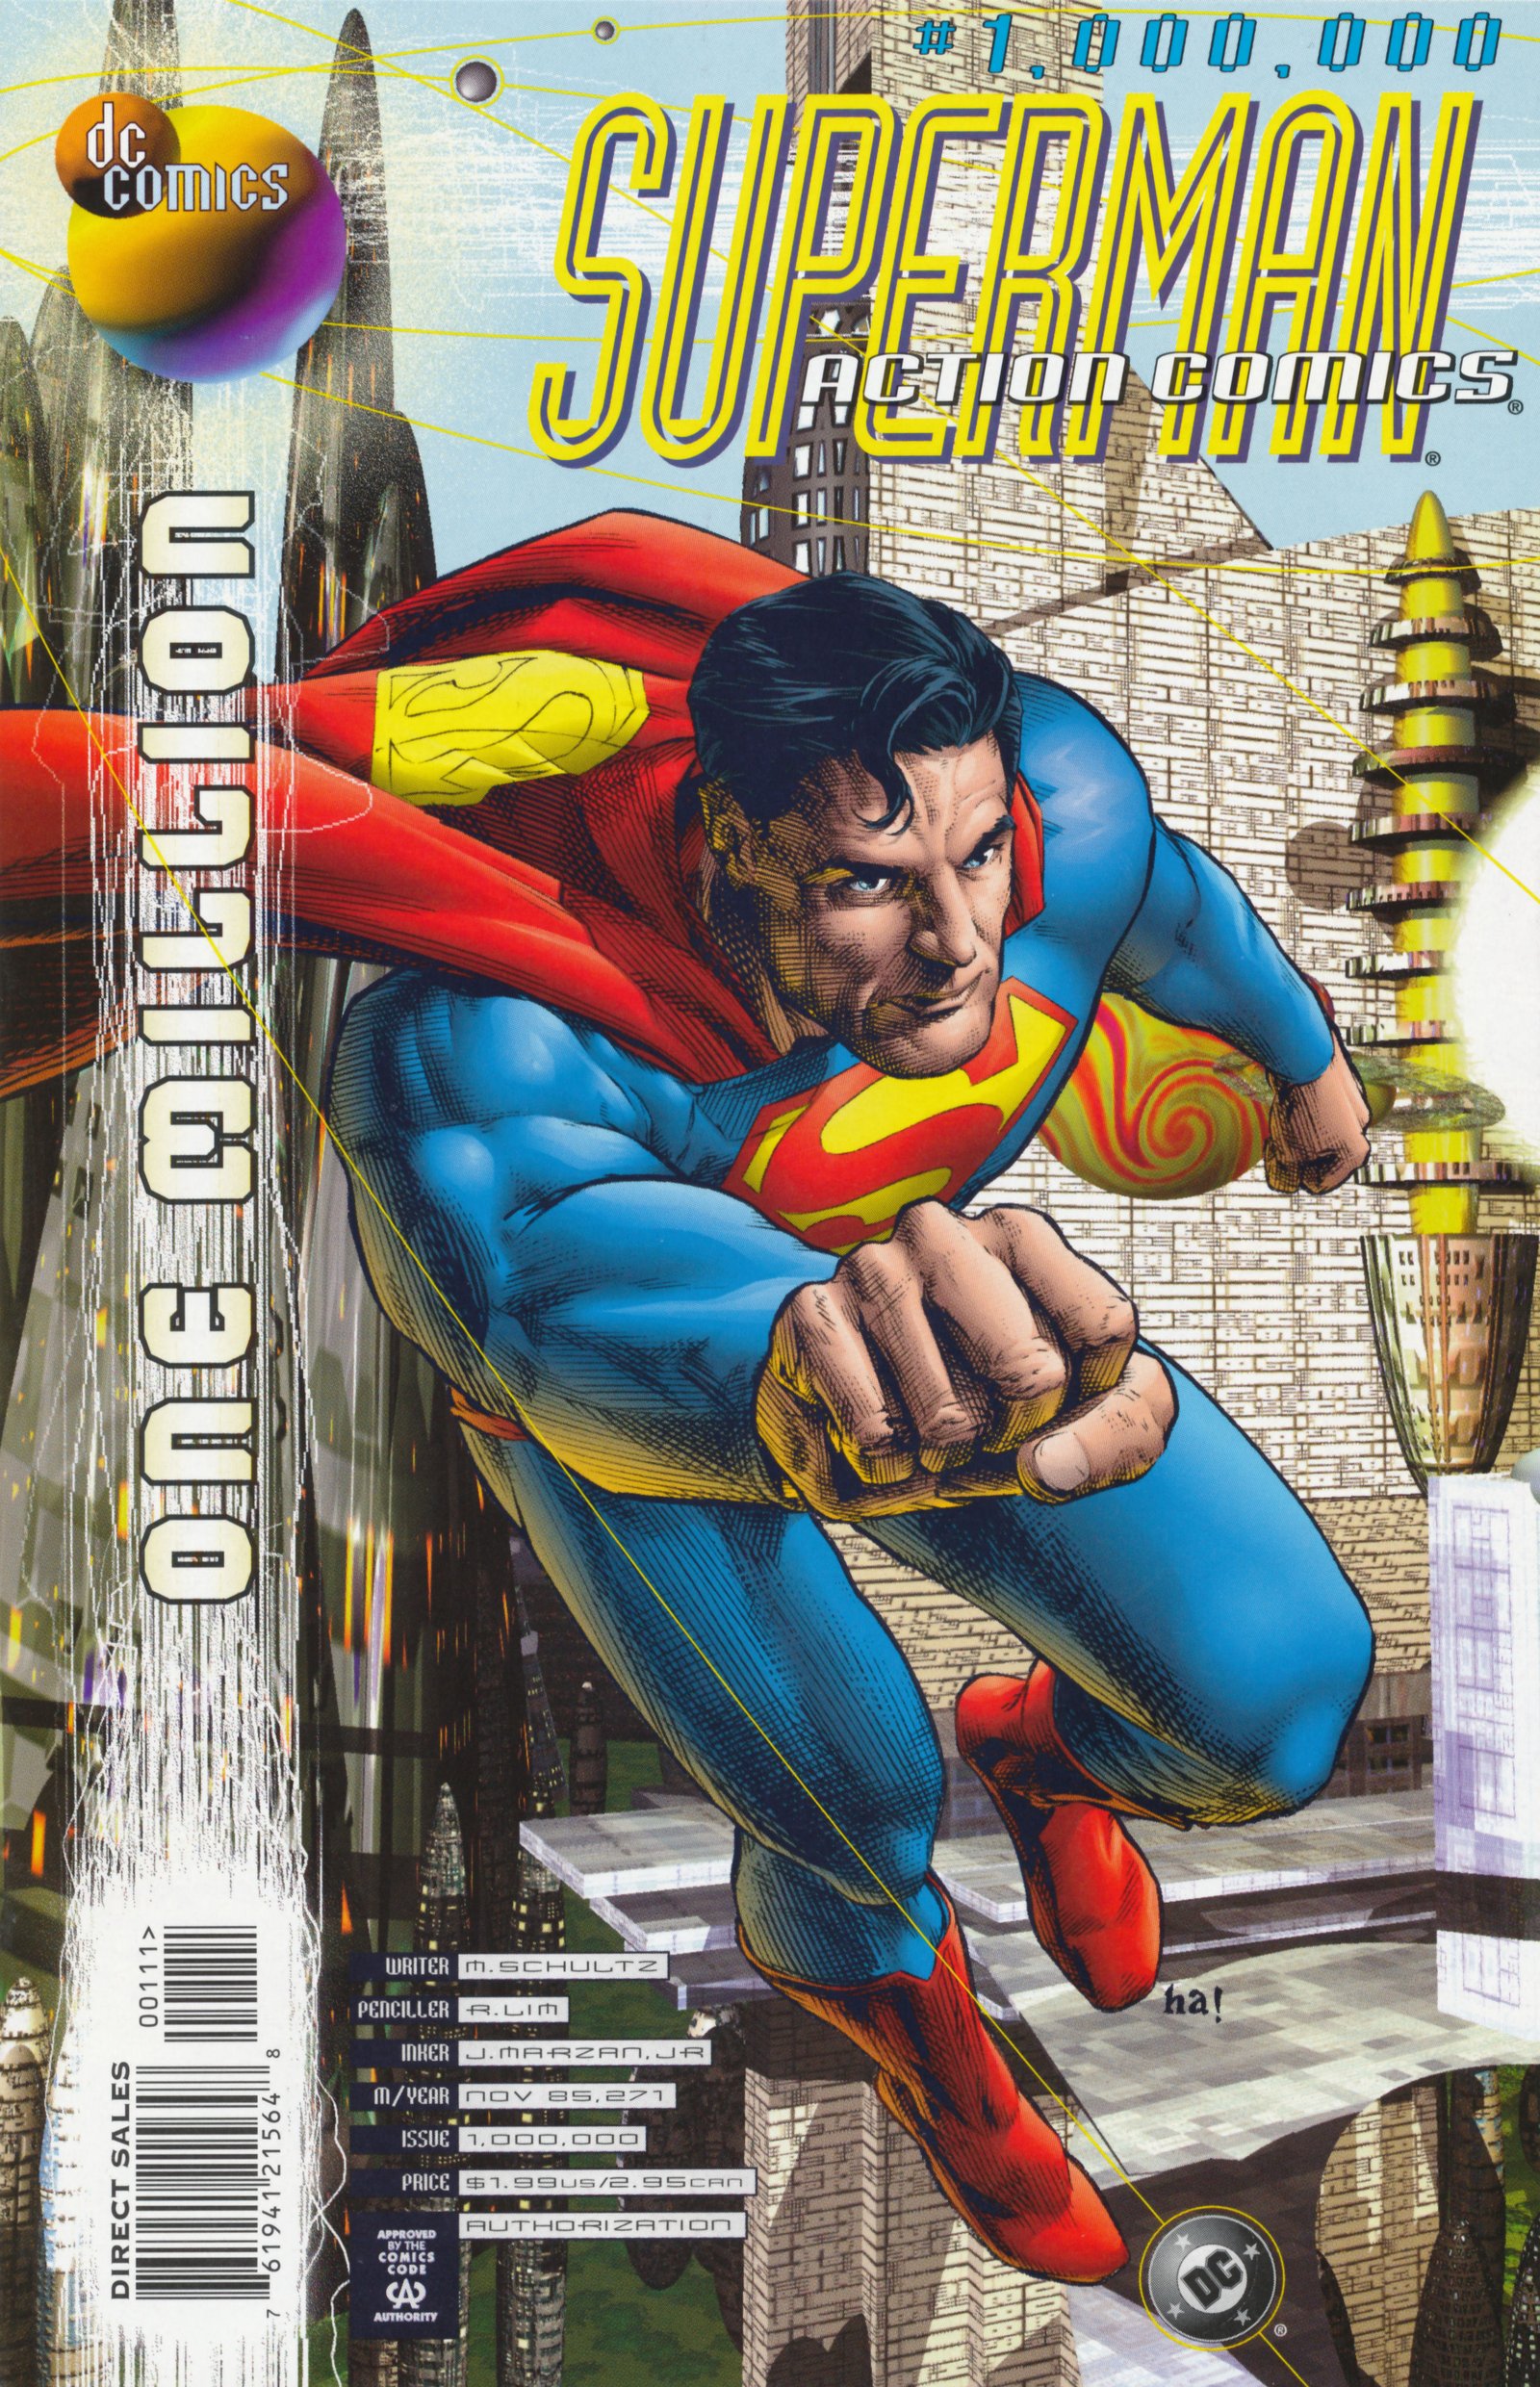 Read online Action Comics (1938) comic -  Issue #1,000,000 - 1